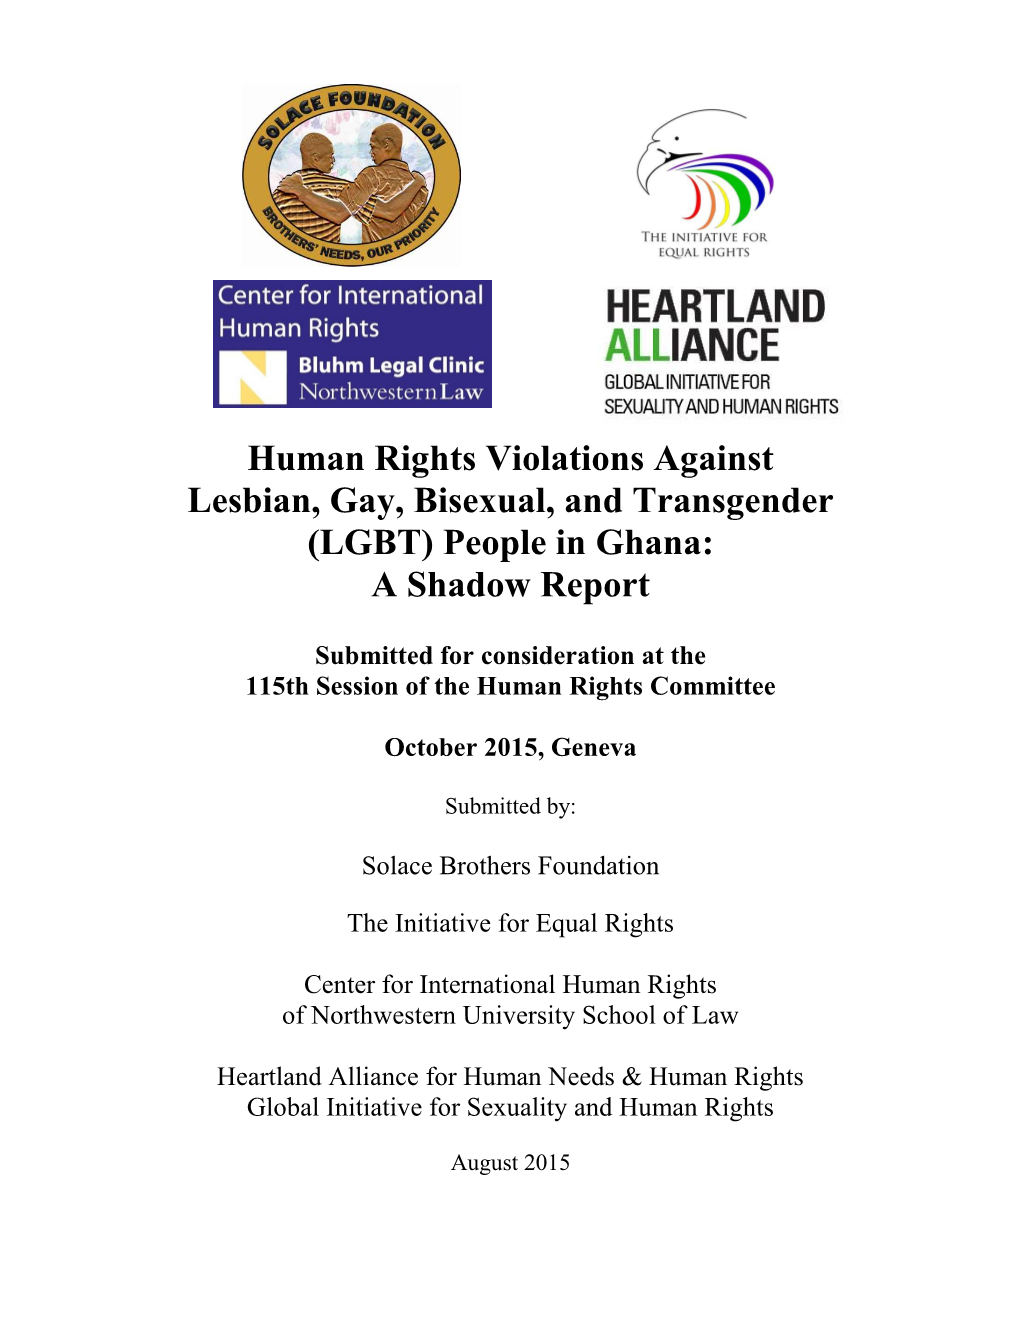 Human Rights Violations Against Lesbian, Gay, Bisexual, and Transgender (LGBT) People in Ghana: a Shadow Report